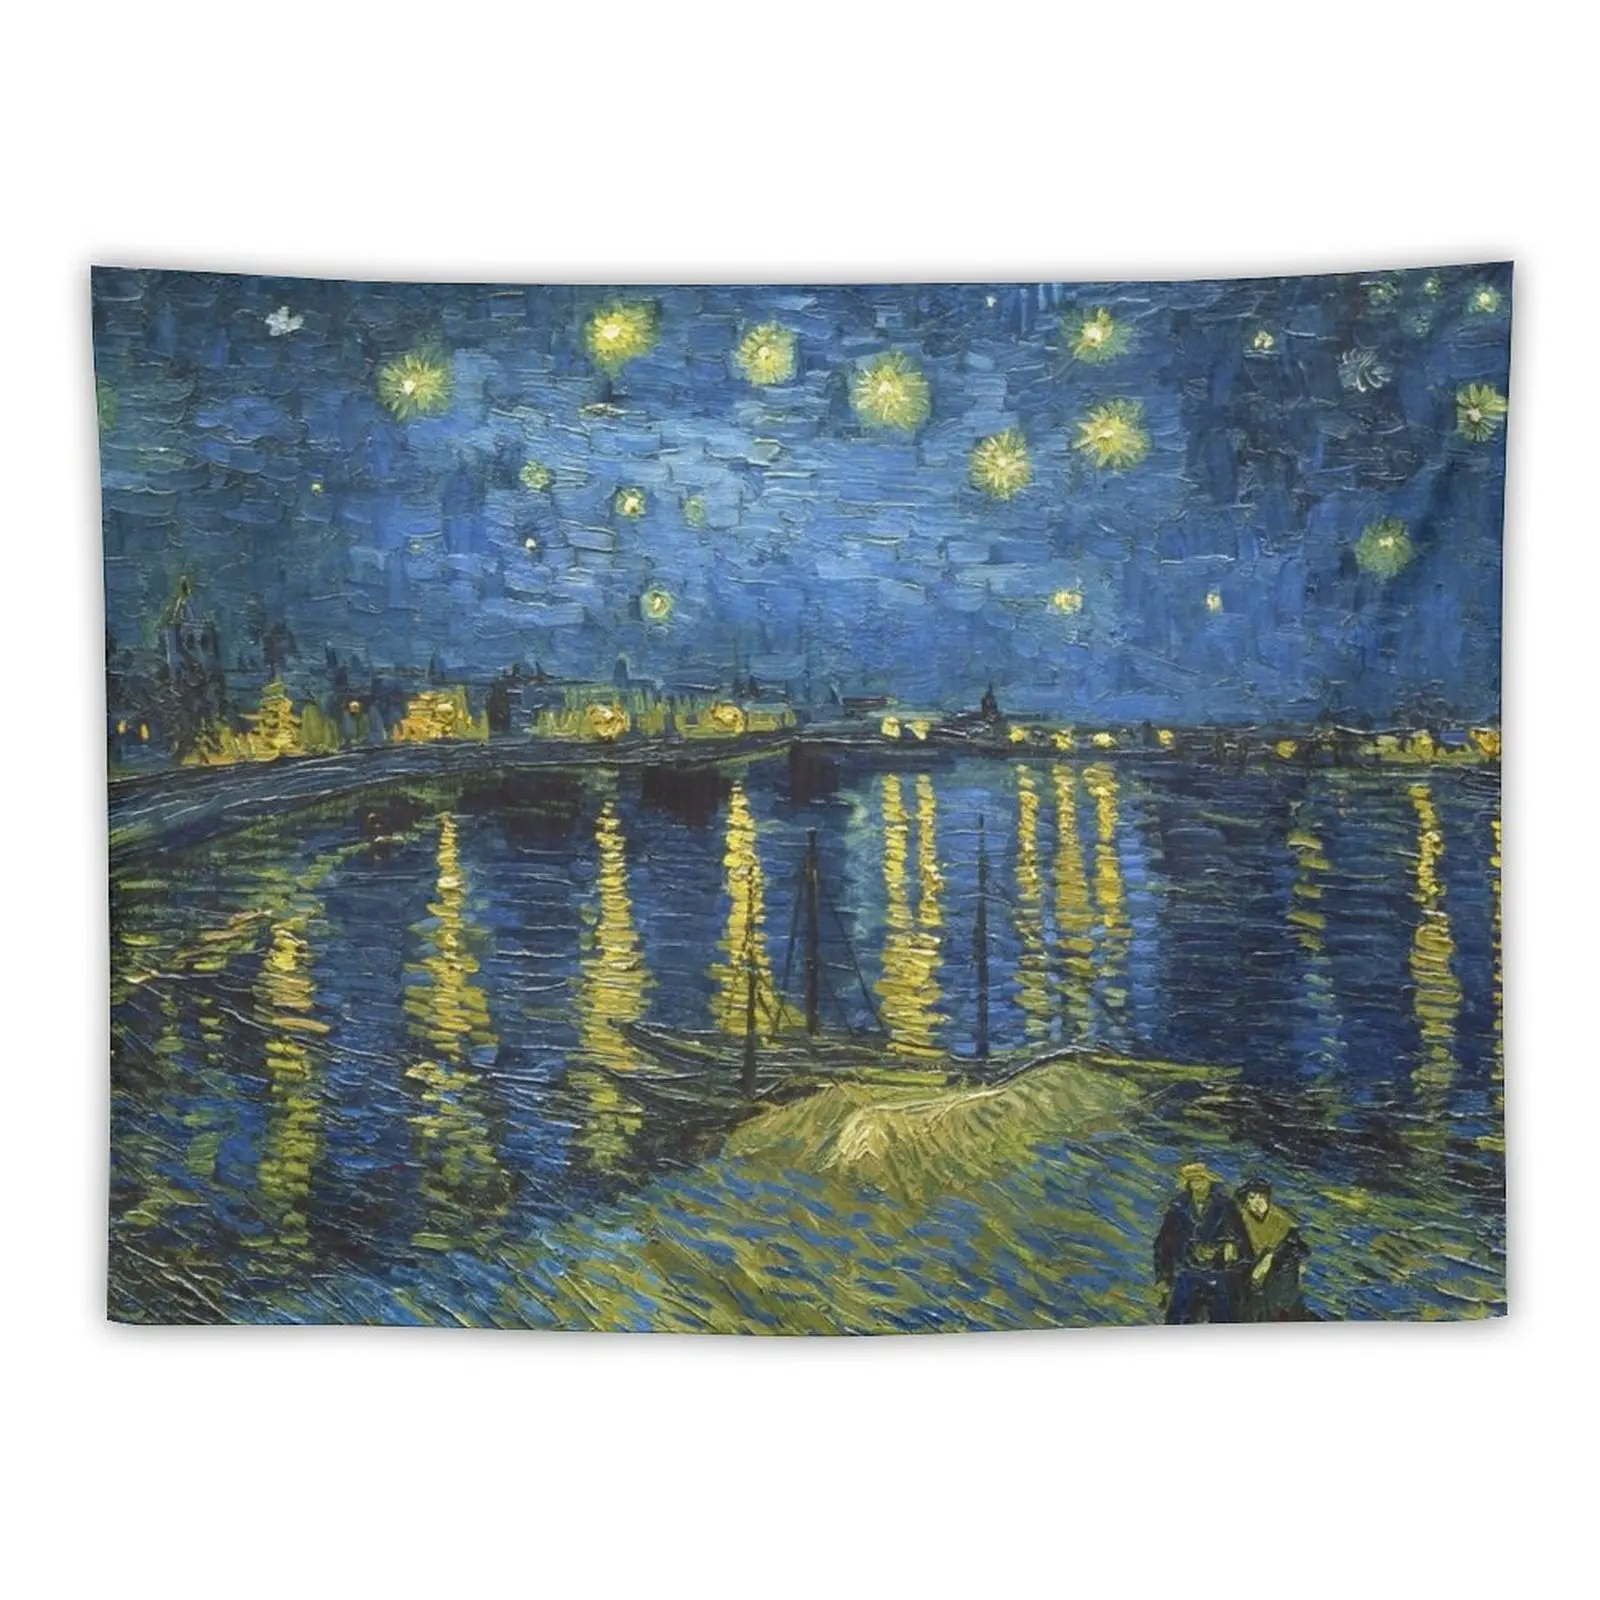 

Starry Night on the Rhone by Vincent van Gogh (Sept. 1888) Tapestry Carpet Wall Room Decor Cute Cute Decor